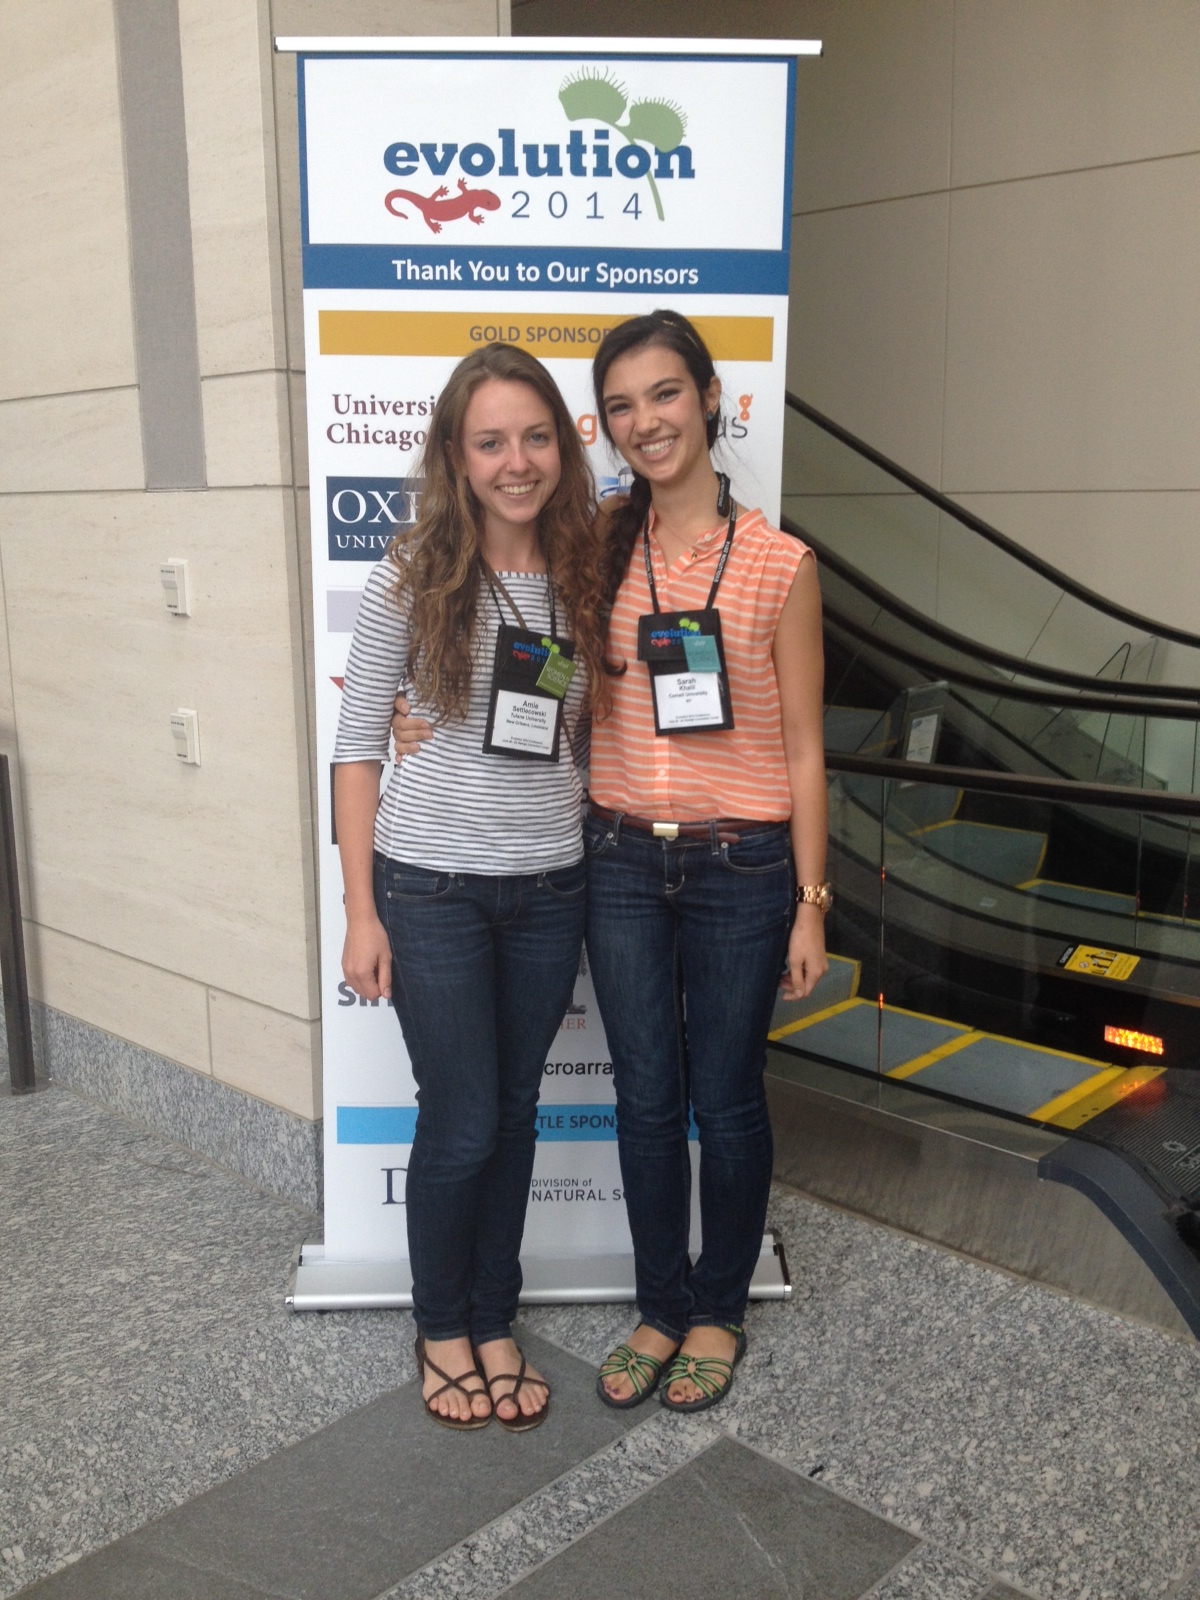 My friend Sarah Khalil, another undergraduate, were both really excited to be at Evolution! We were also excited to be reunited after studying abroad together last semester.